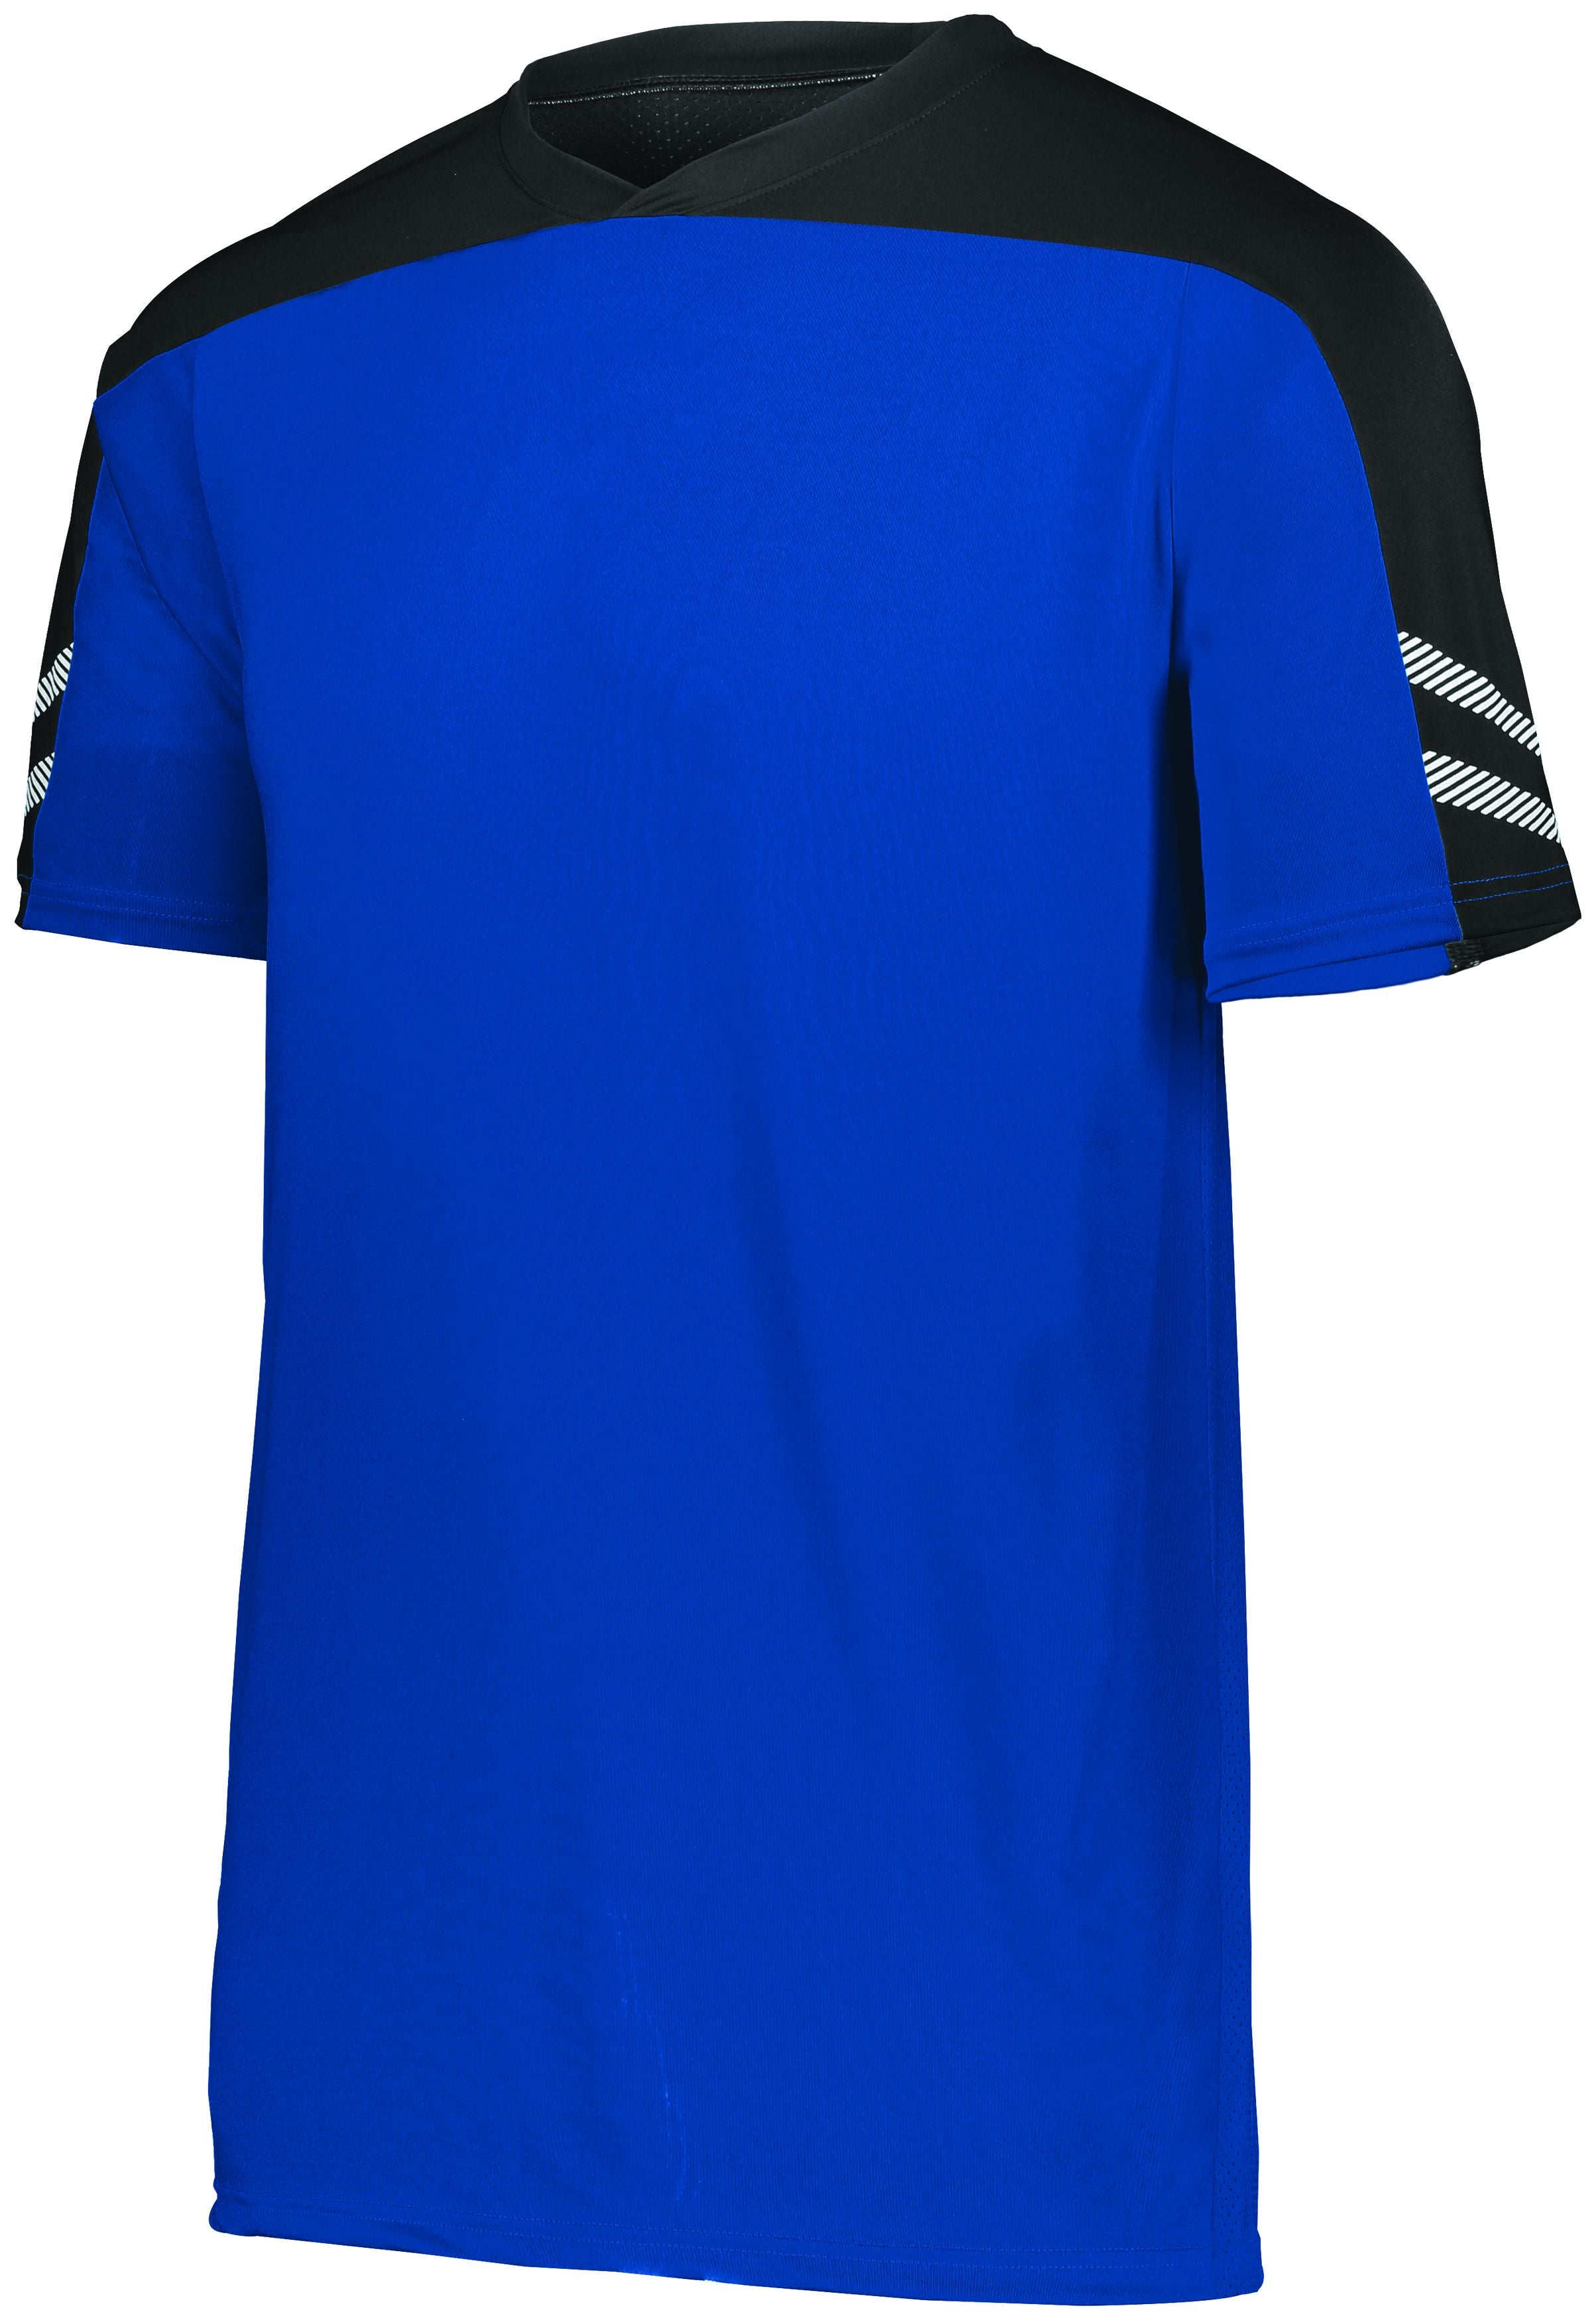 High 5 Anfield Soccer Jersey in Royal/Black/White  -Part of the Adult, Adult-Jersey, High5-Products, Soccer, Shirts, All-Sports-1 product lines at KanaleyCreations.com